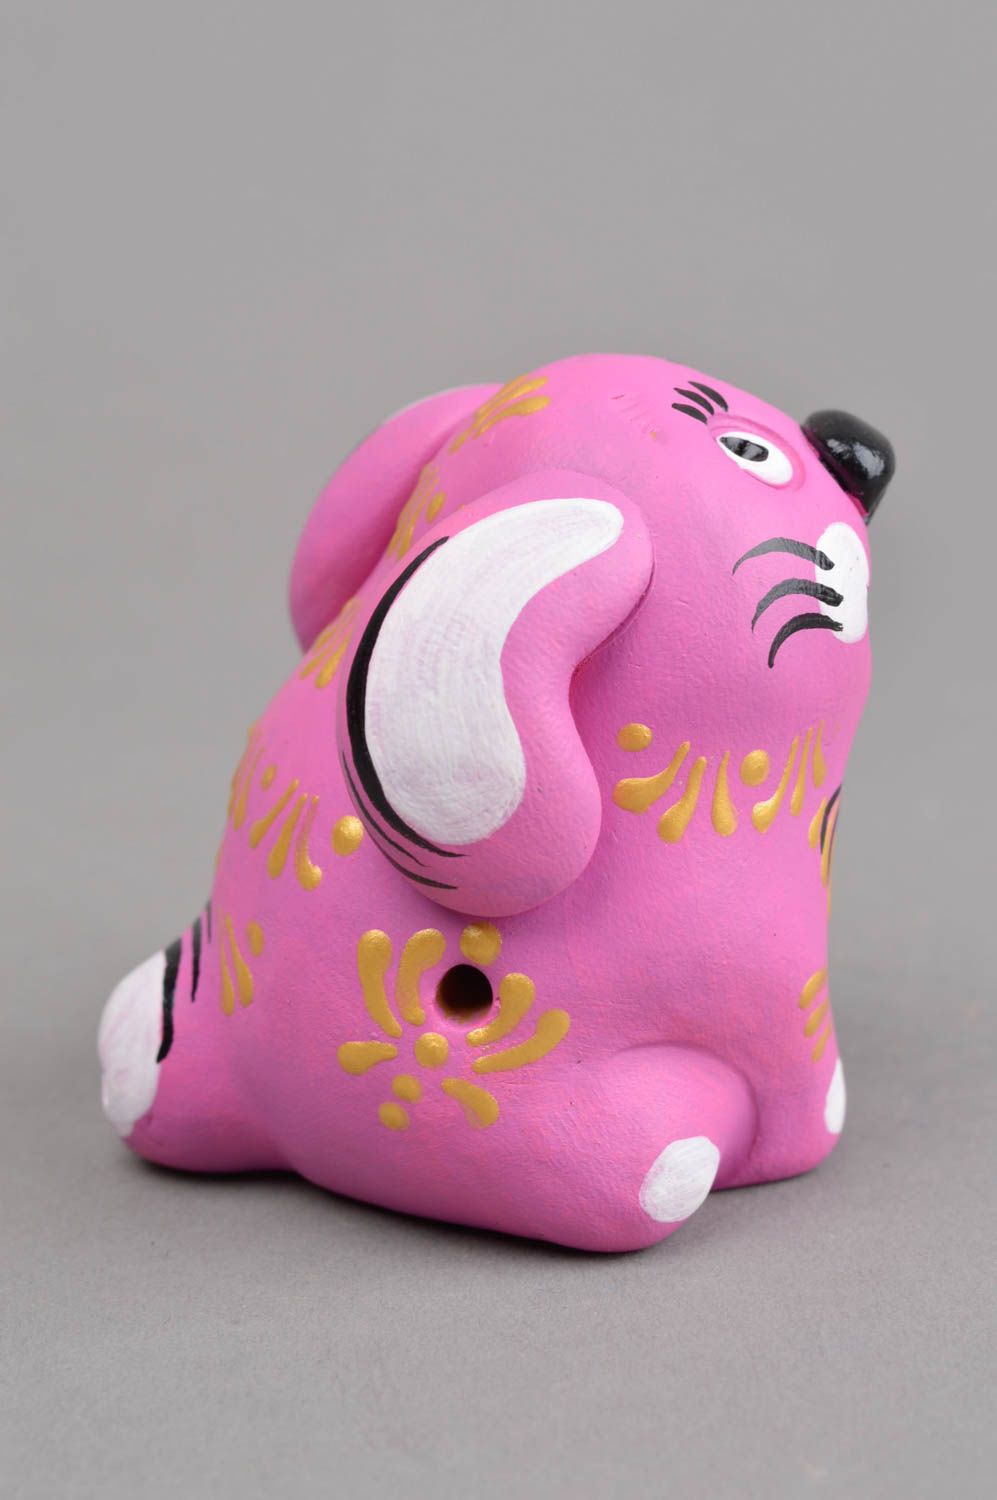 Clay whistle handmade ceramic statuette present for children clay animal whistle photo 3